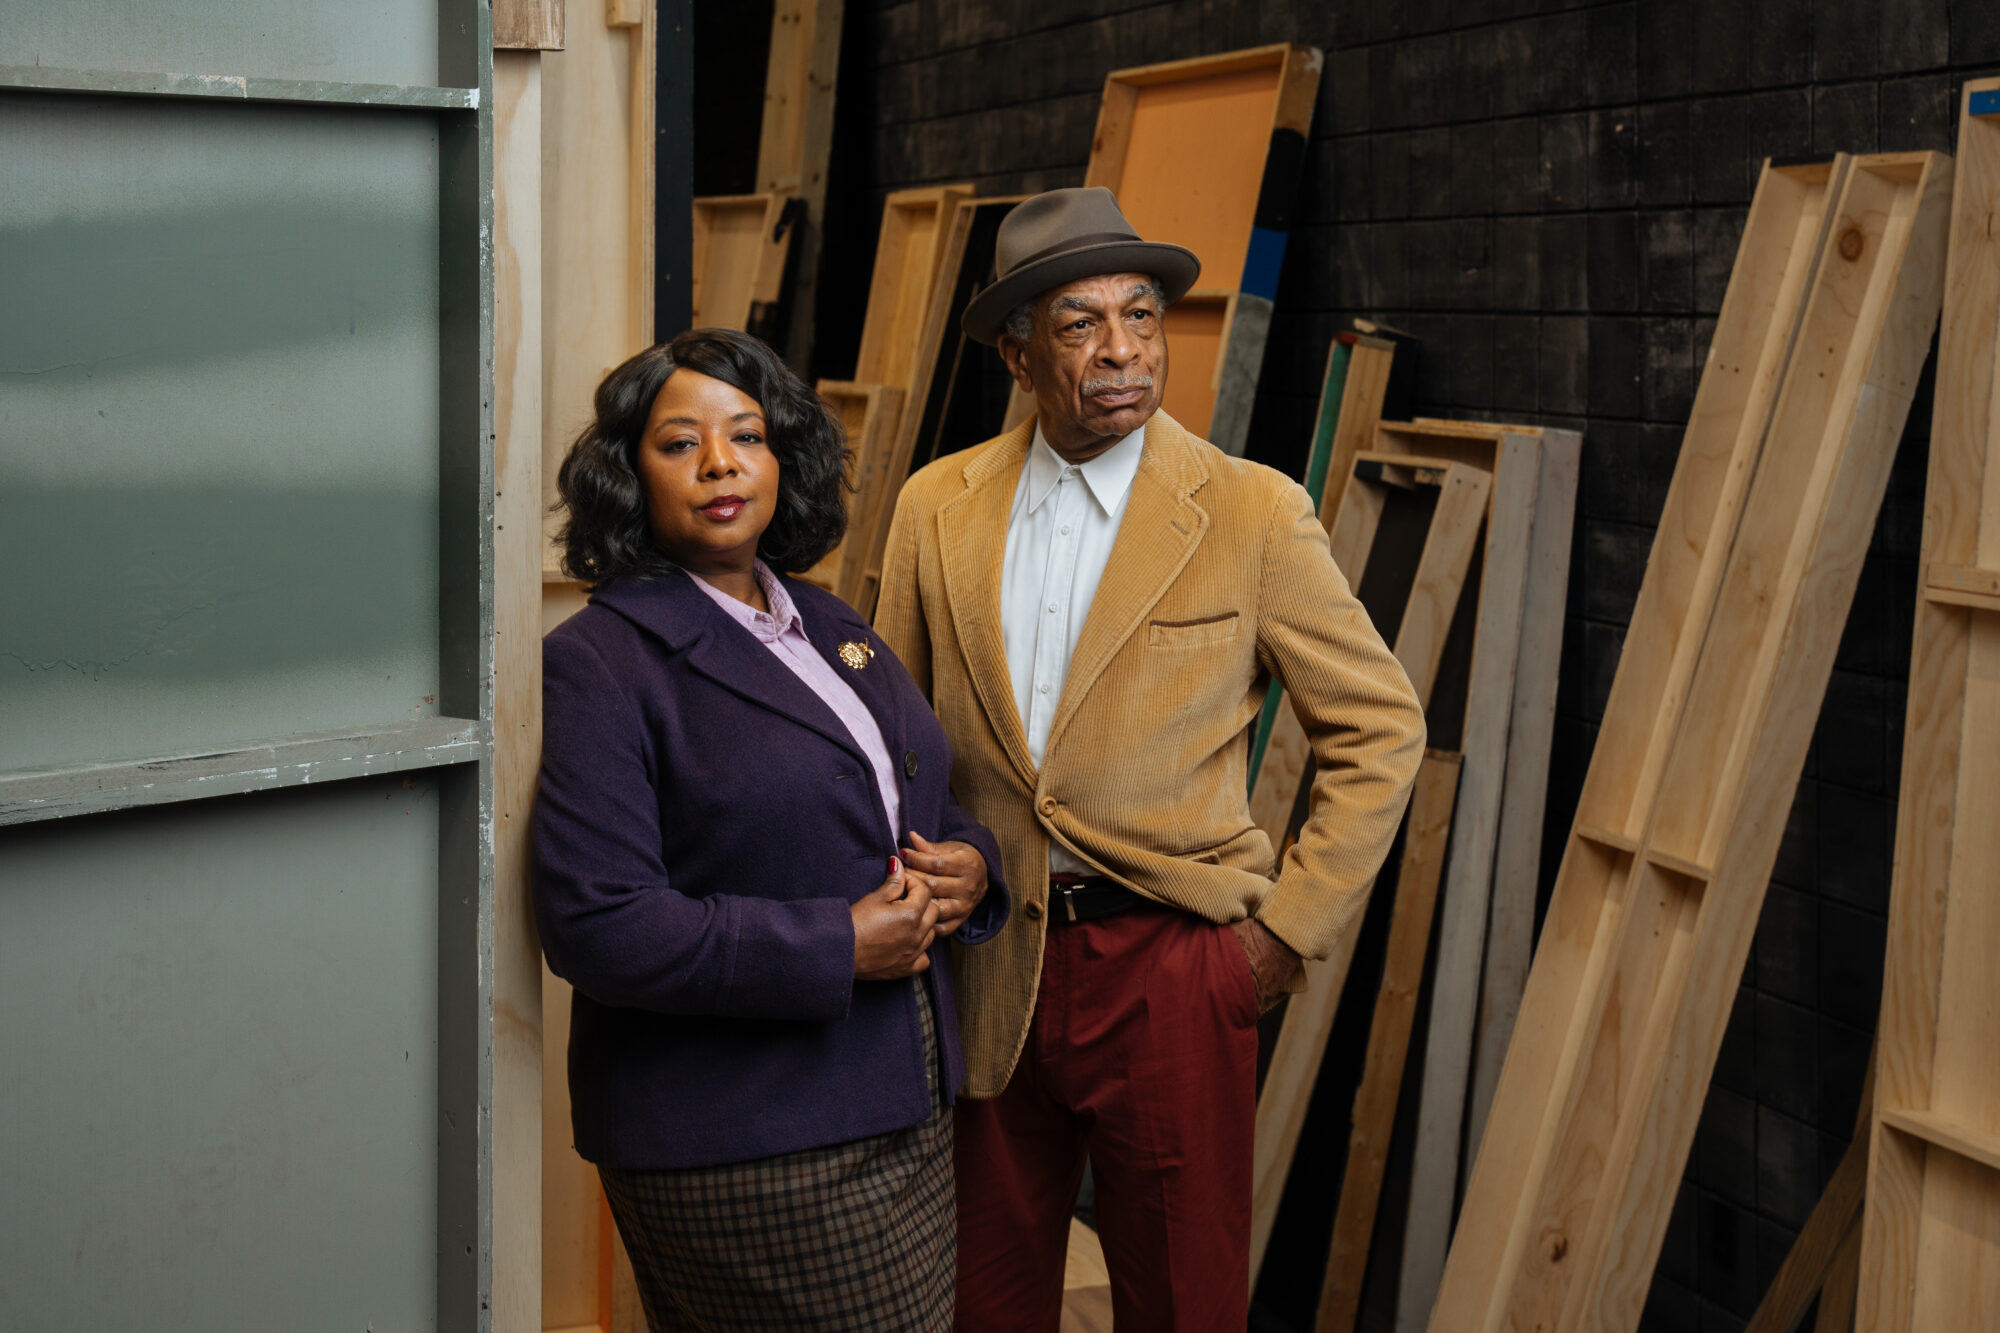 The Warehouse Theatre Produces ‘Trouble in Mind’ About Black Actors in Theater